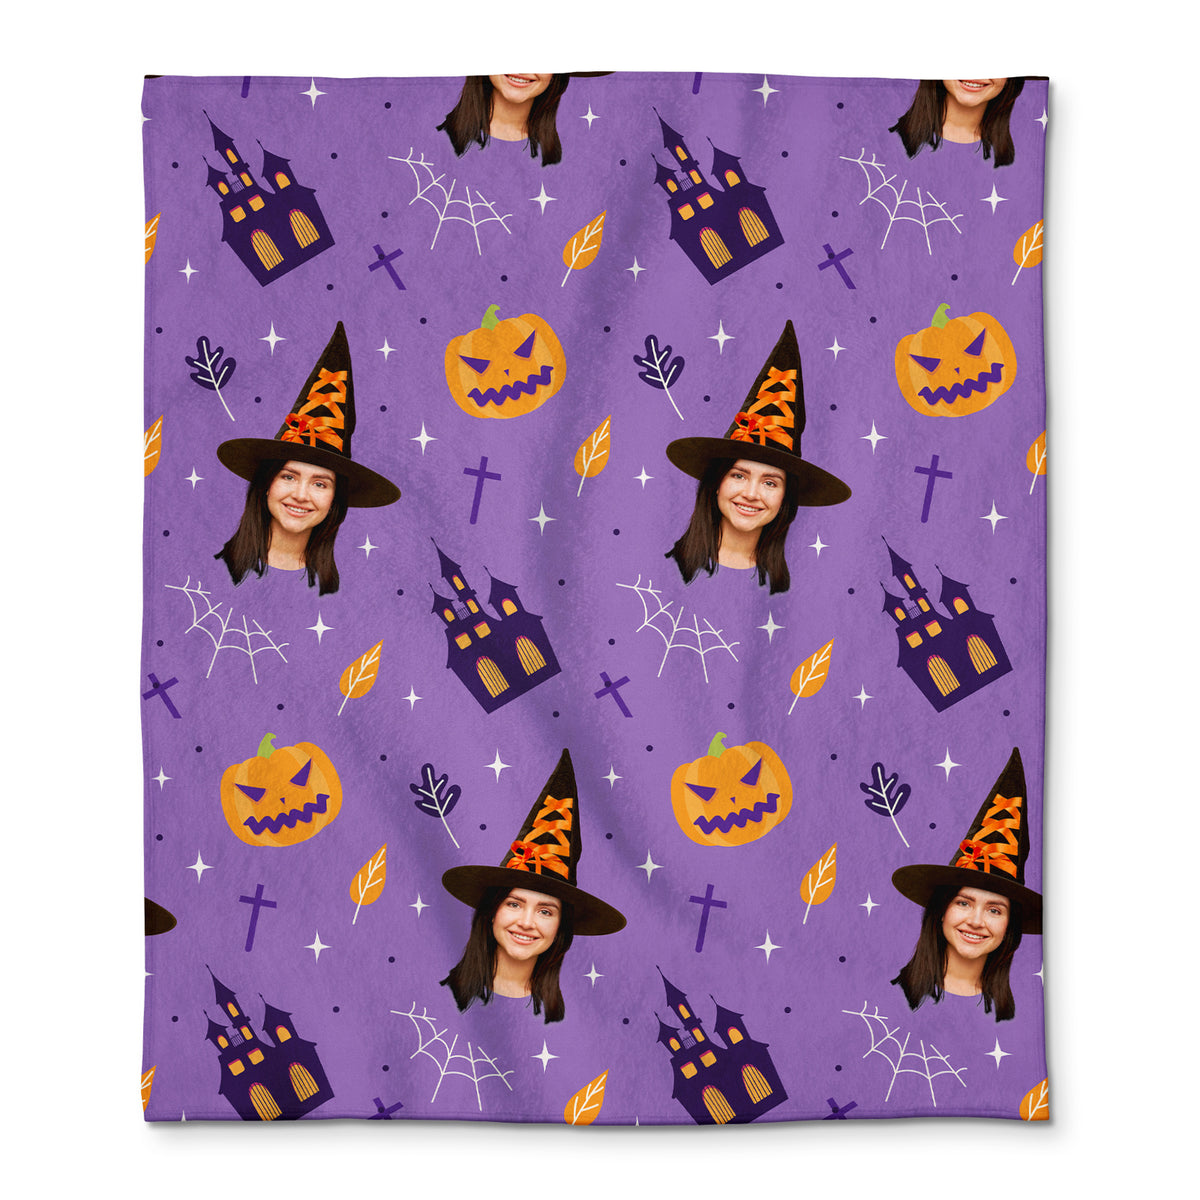 Happy Halloween Creating Memories with Floating Faces Your Blanket